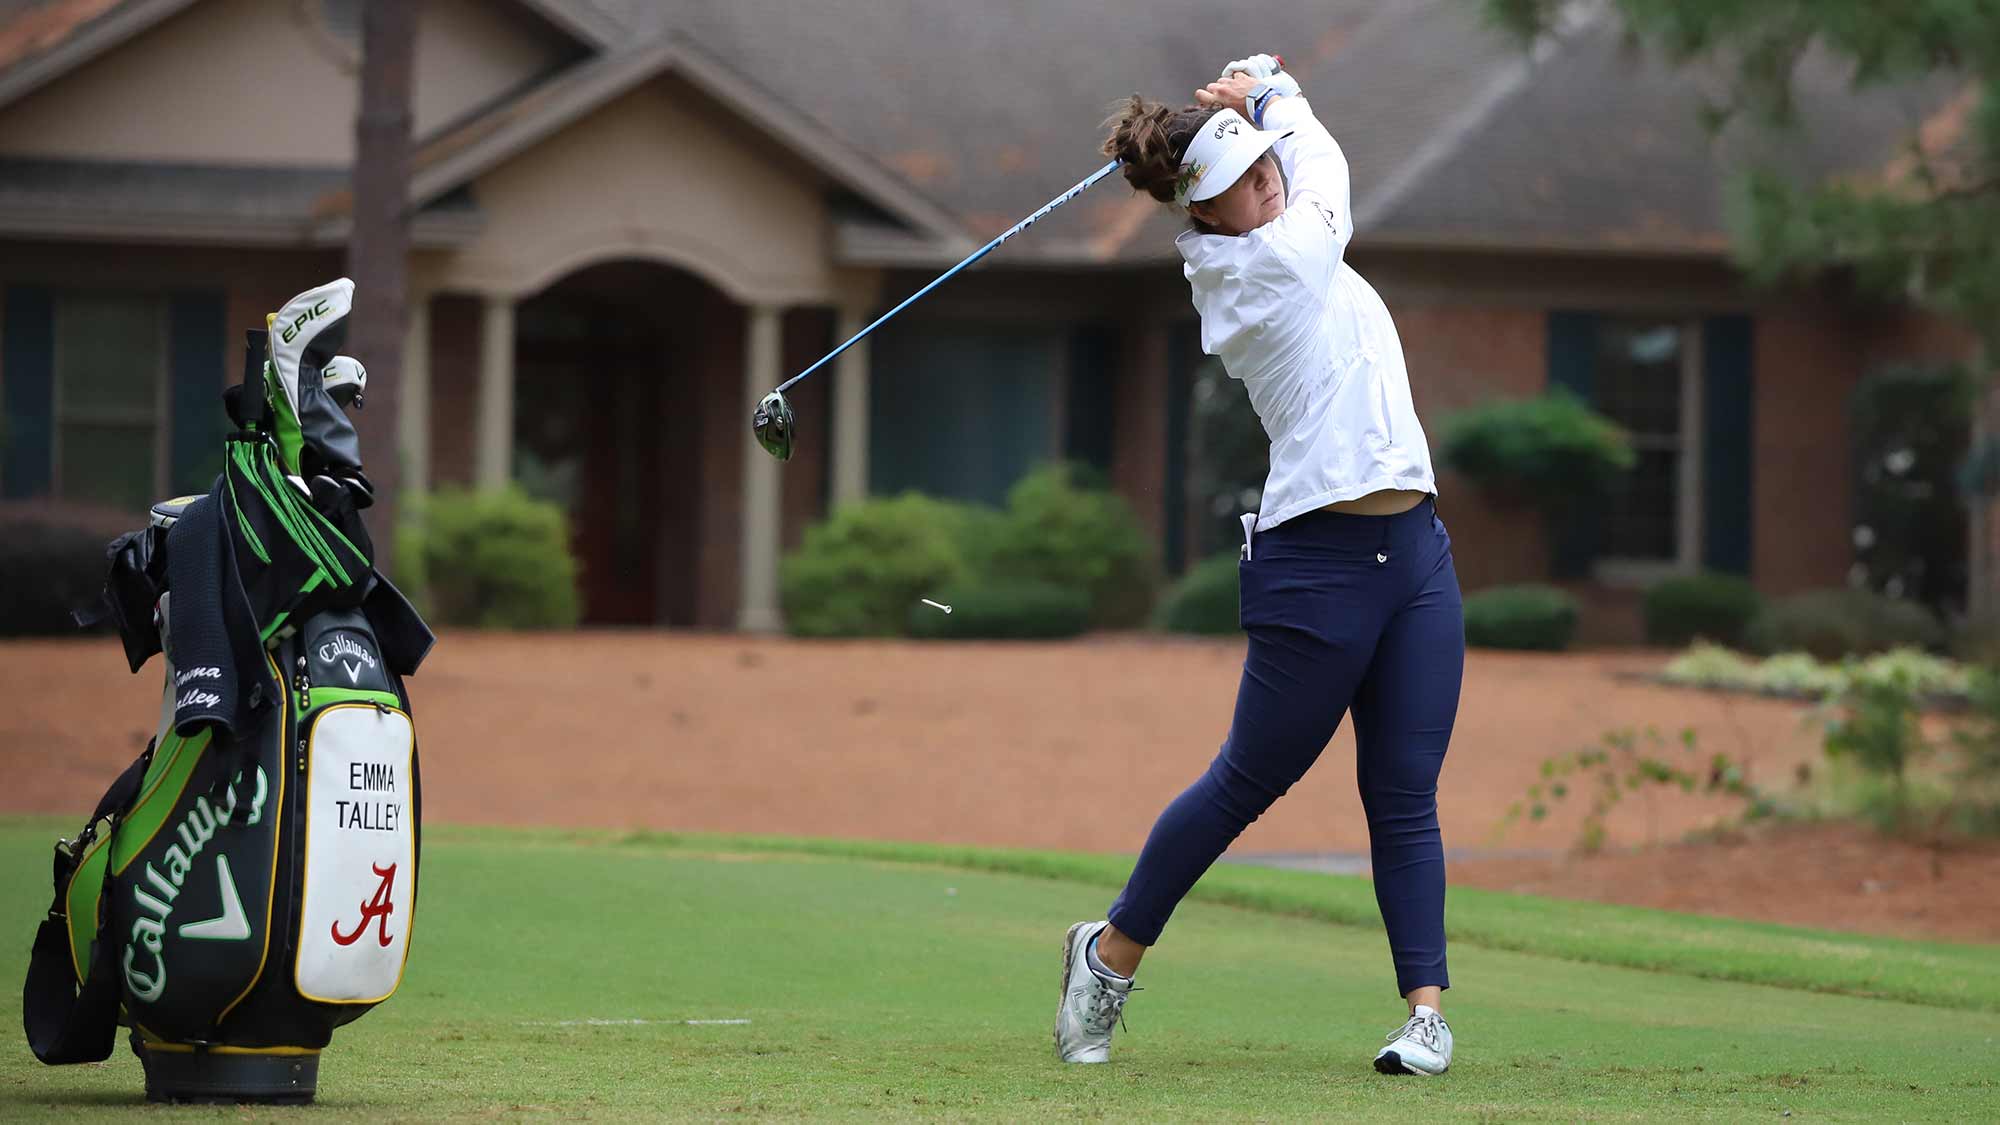 Emma Talley hits a tee shot during a practice round ahead of the first round of the 2019 LPGA Q-Series at Pinehurst Resort